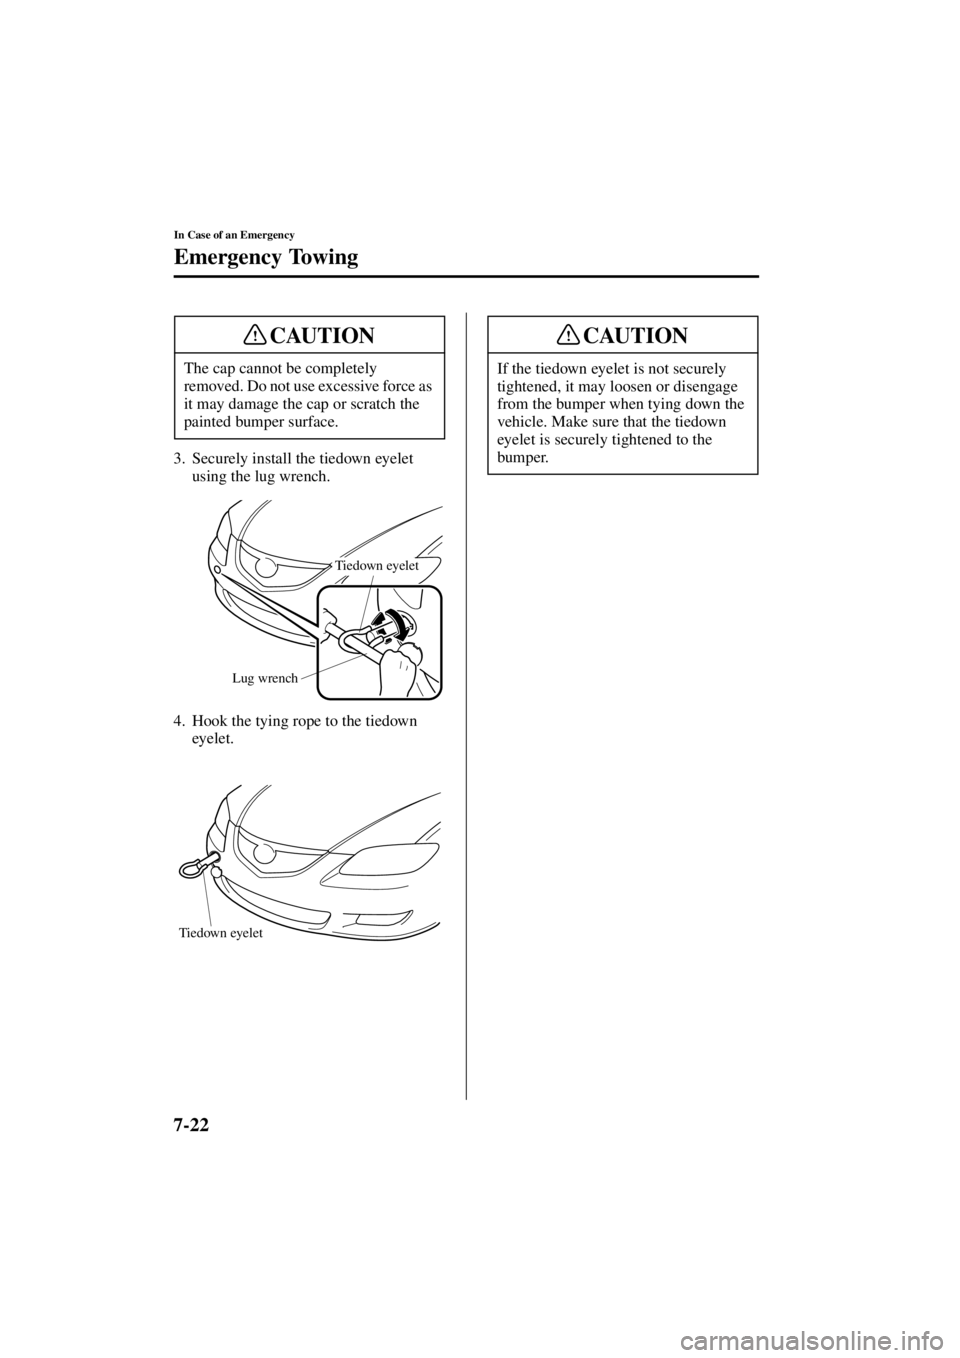 MAZDA MODEL 3 4-DOOR 2004  Owners Manual 7-22
In Case of an Emergency
Emergency Towing
Form No. 8S18-EA-03I
3. Securely install the tiedown eyelet using the lug wrench.
4. Hook the tying rope to the tiedown  eyelet.
The cap cannot be complet